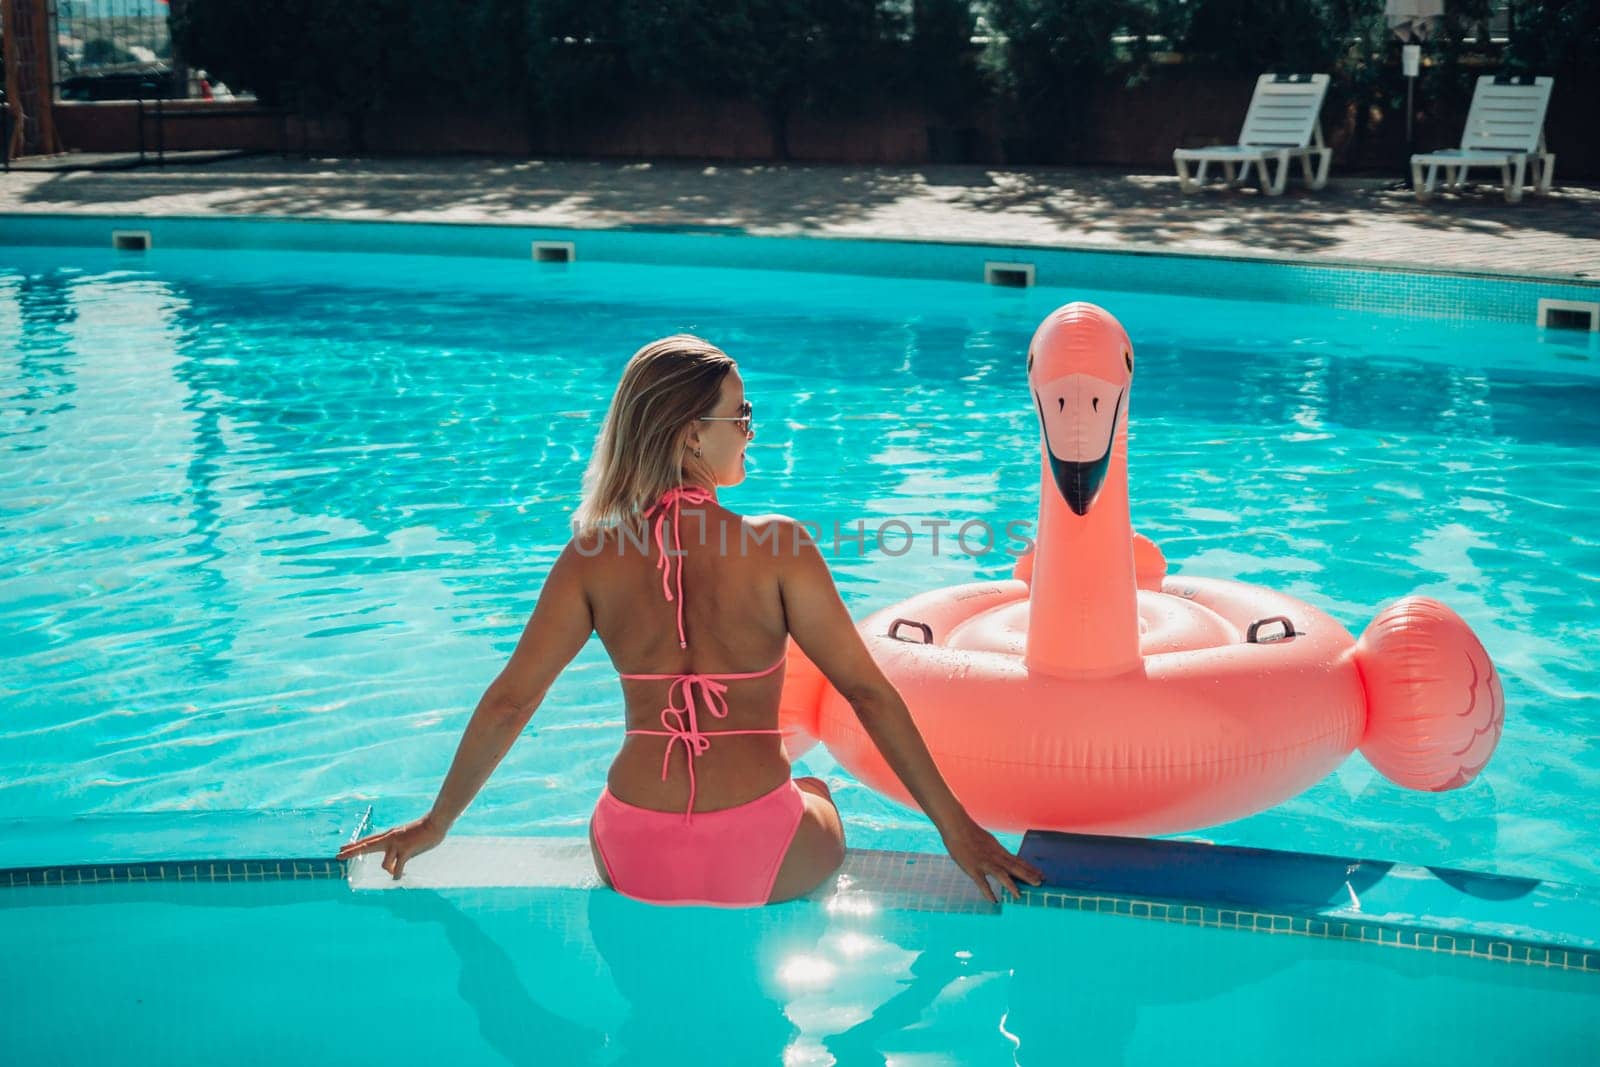 A woman in a pink bikini is sitting on a pink inflatable flamingo in a pool. The scene is playful and fun, with the woman enjoying her time in the water